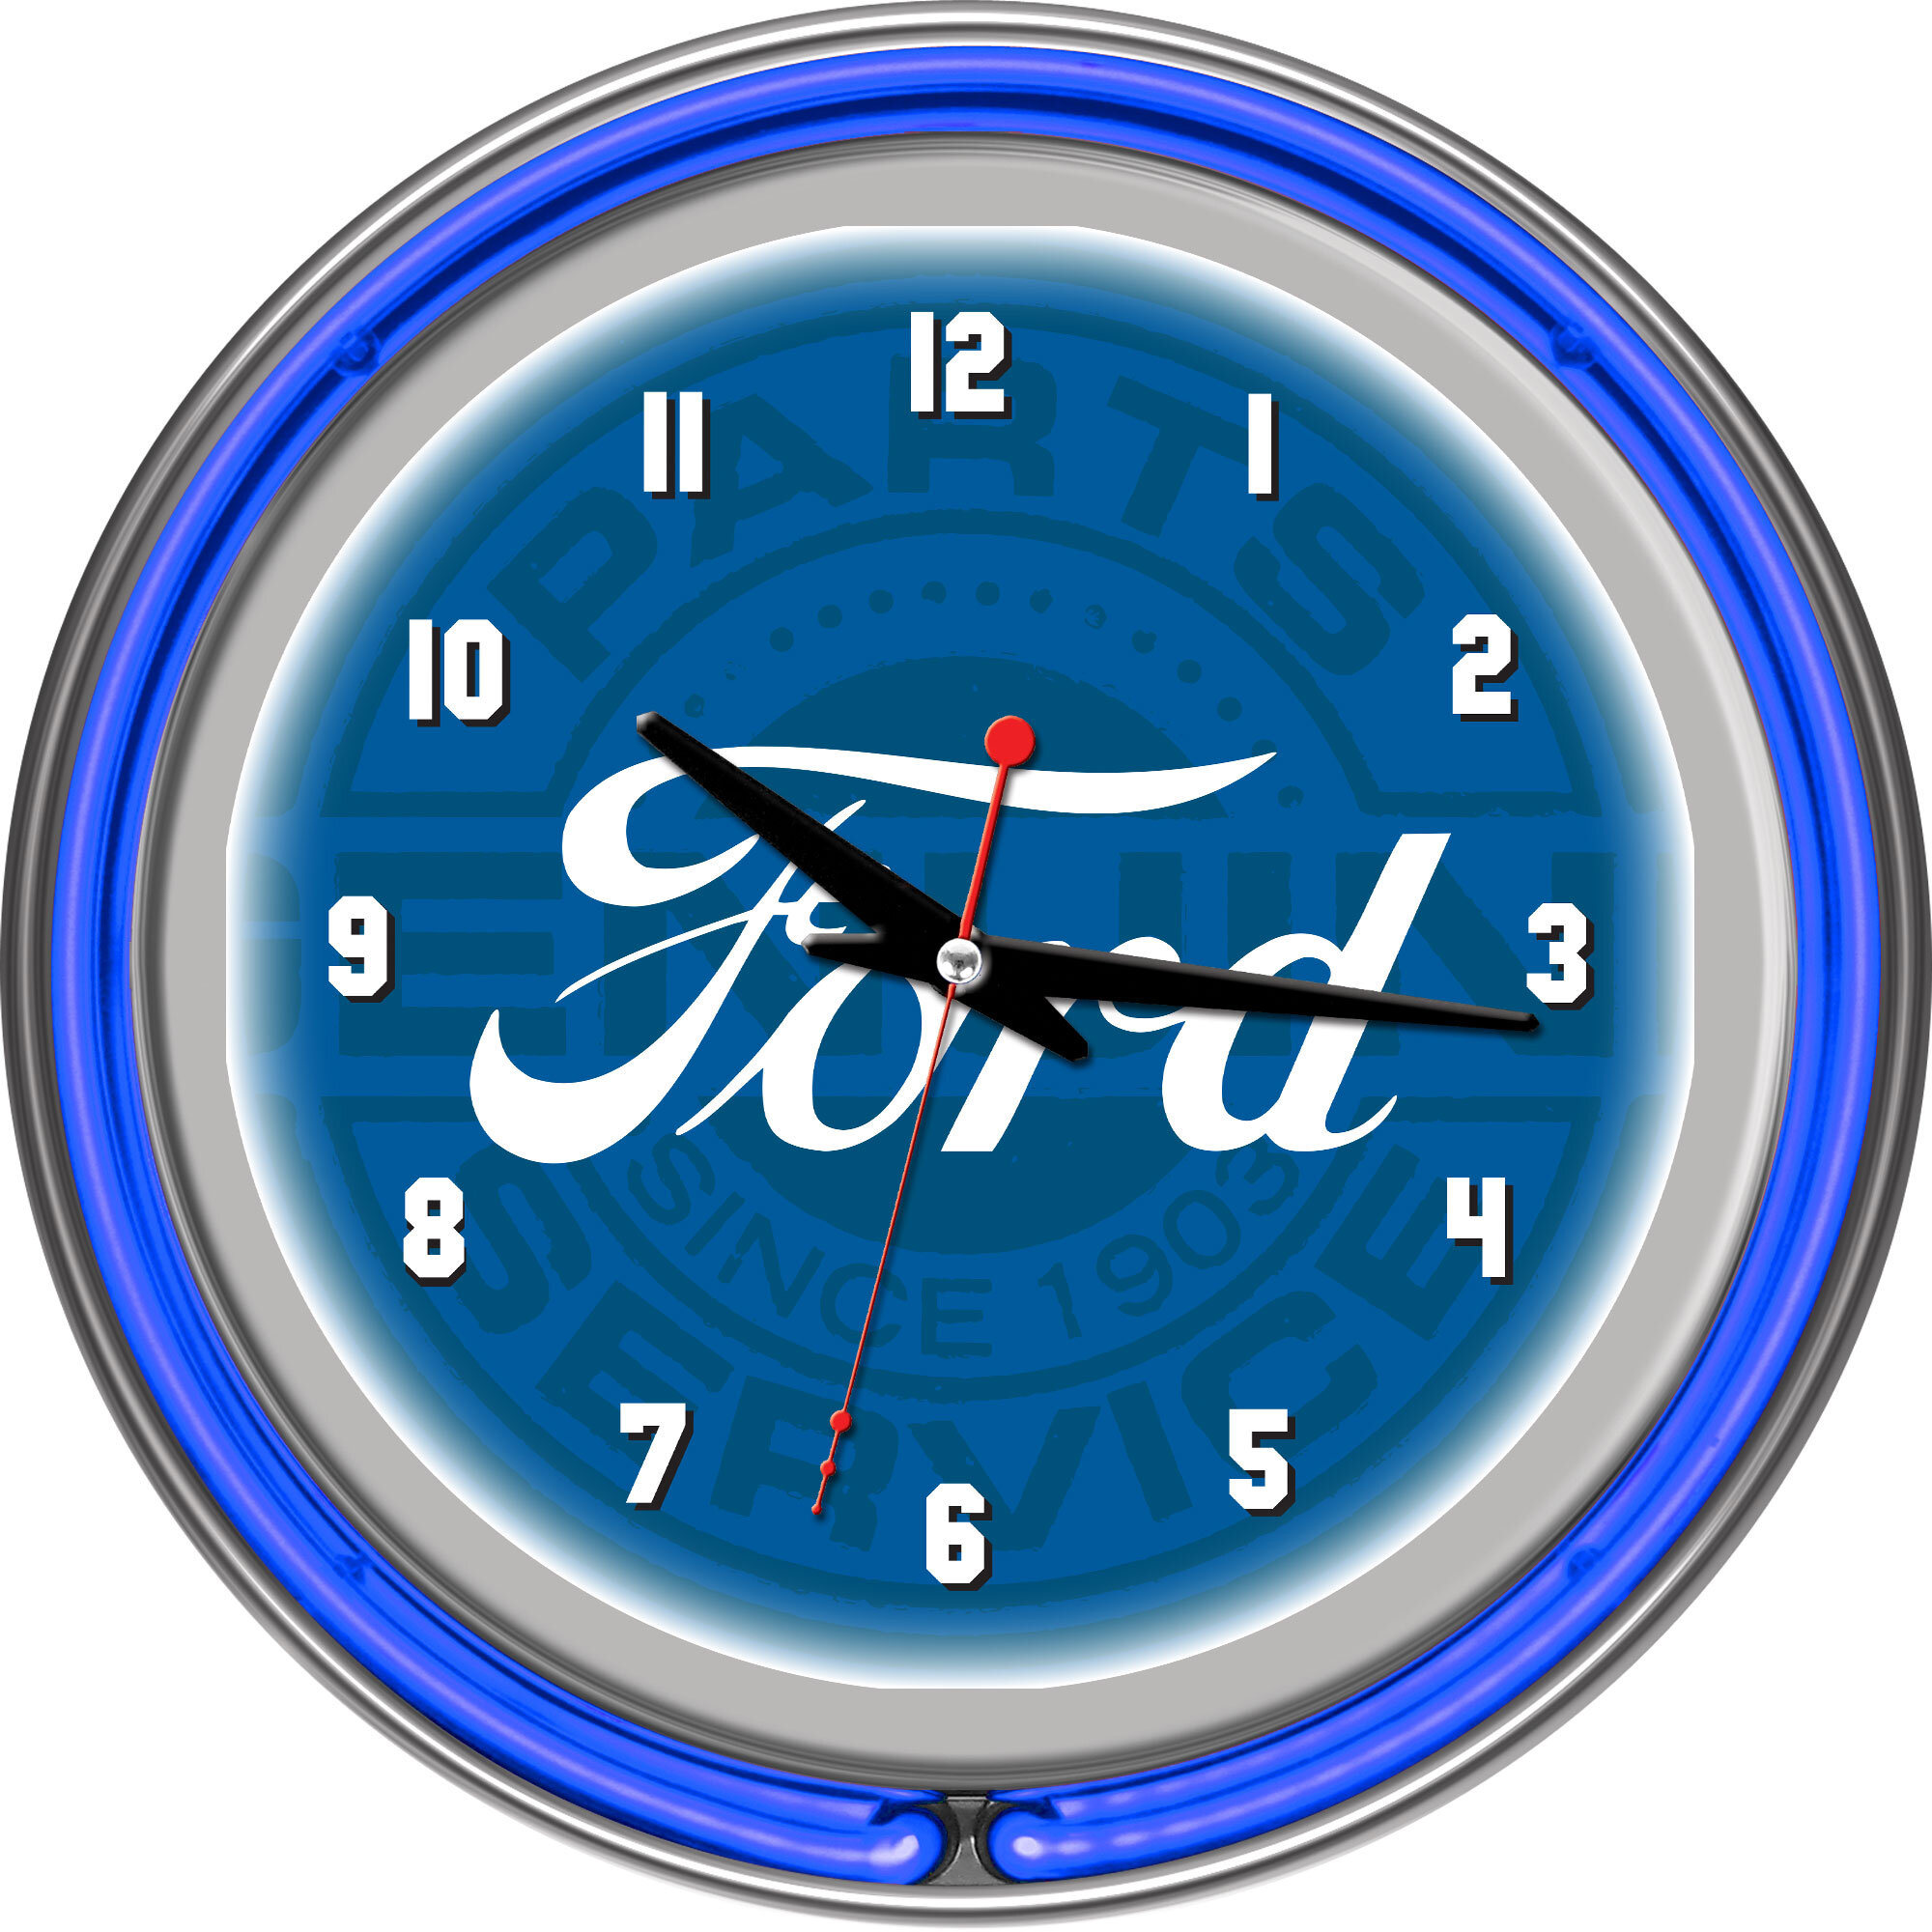 11" Blue Neon Wall Clock AUTHORIZED FORD SERVICE LOGO 